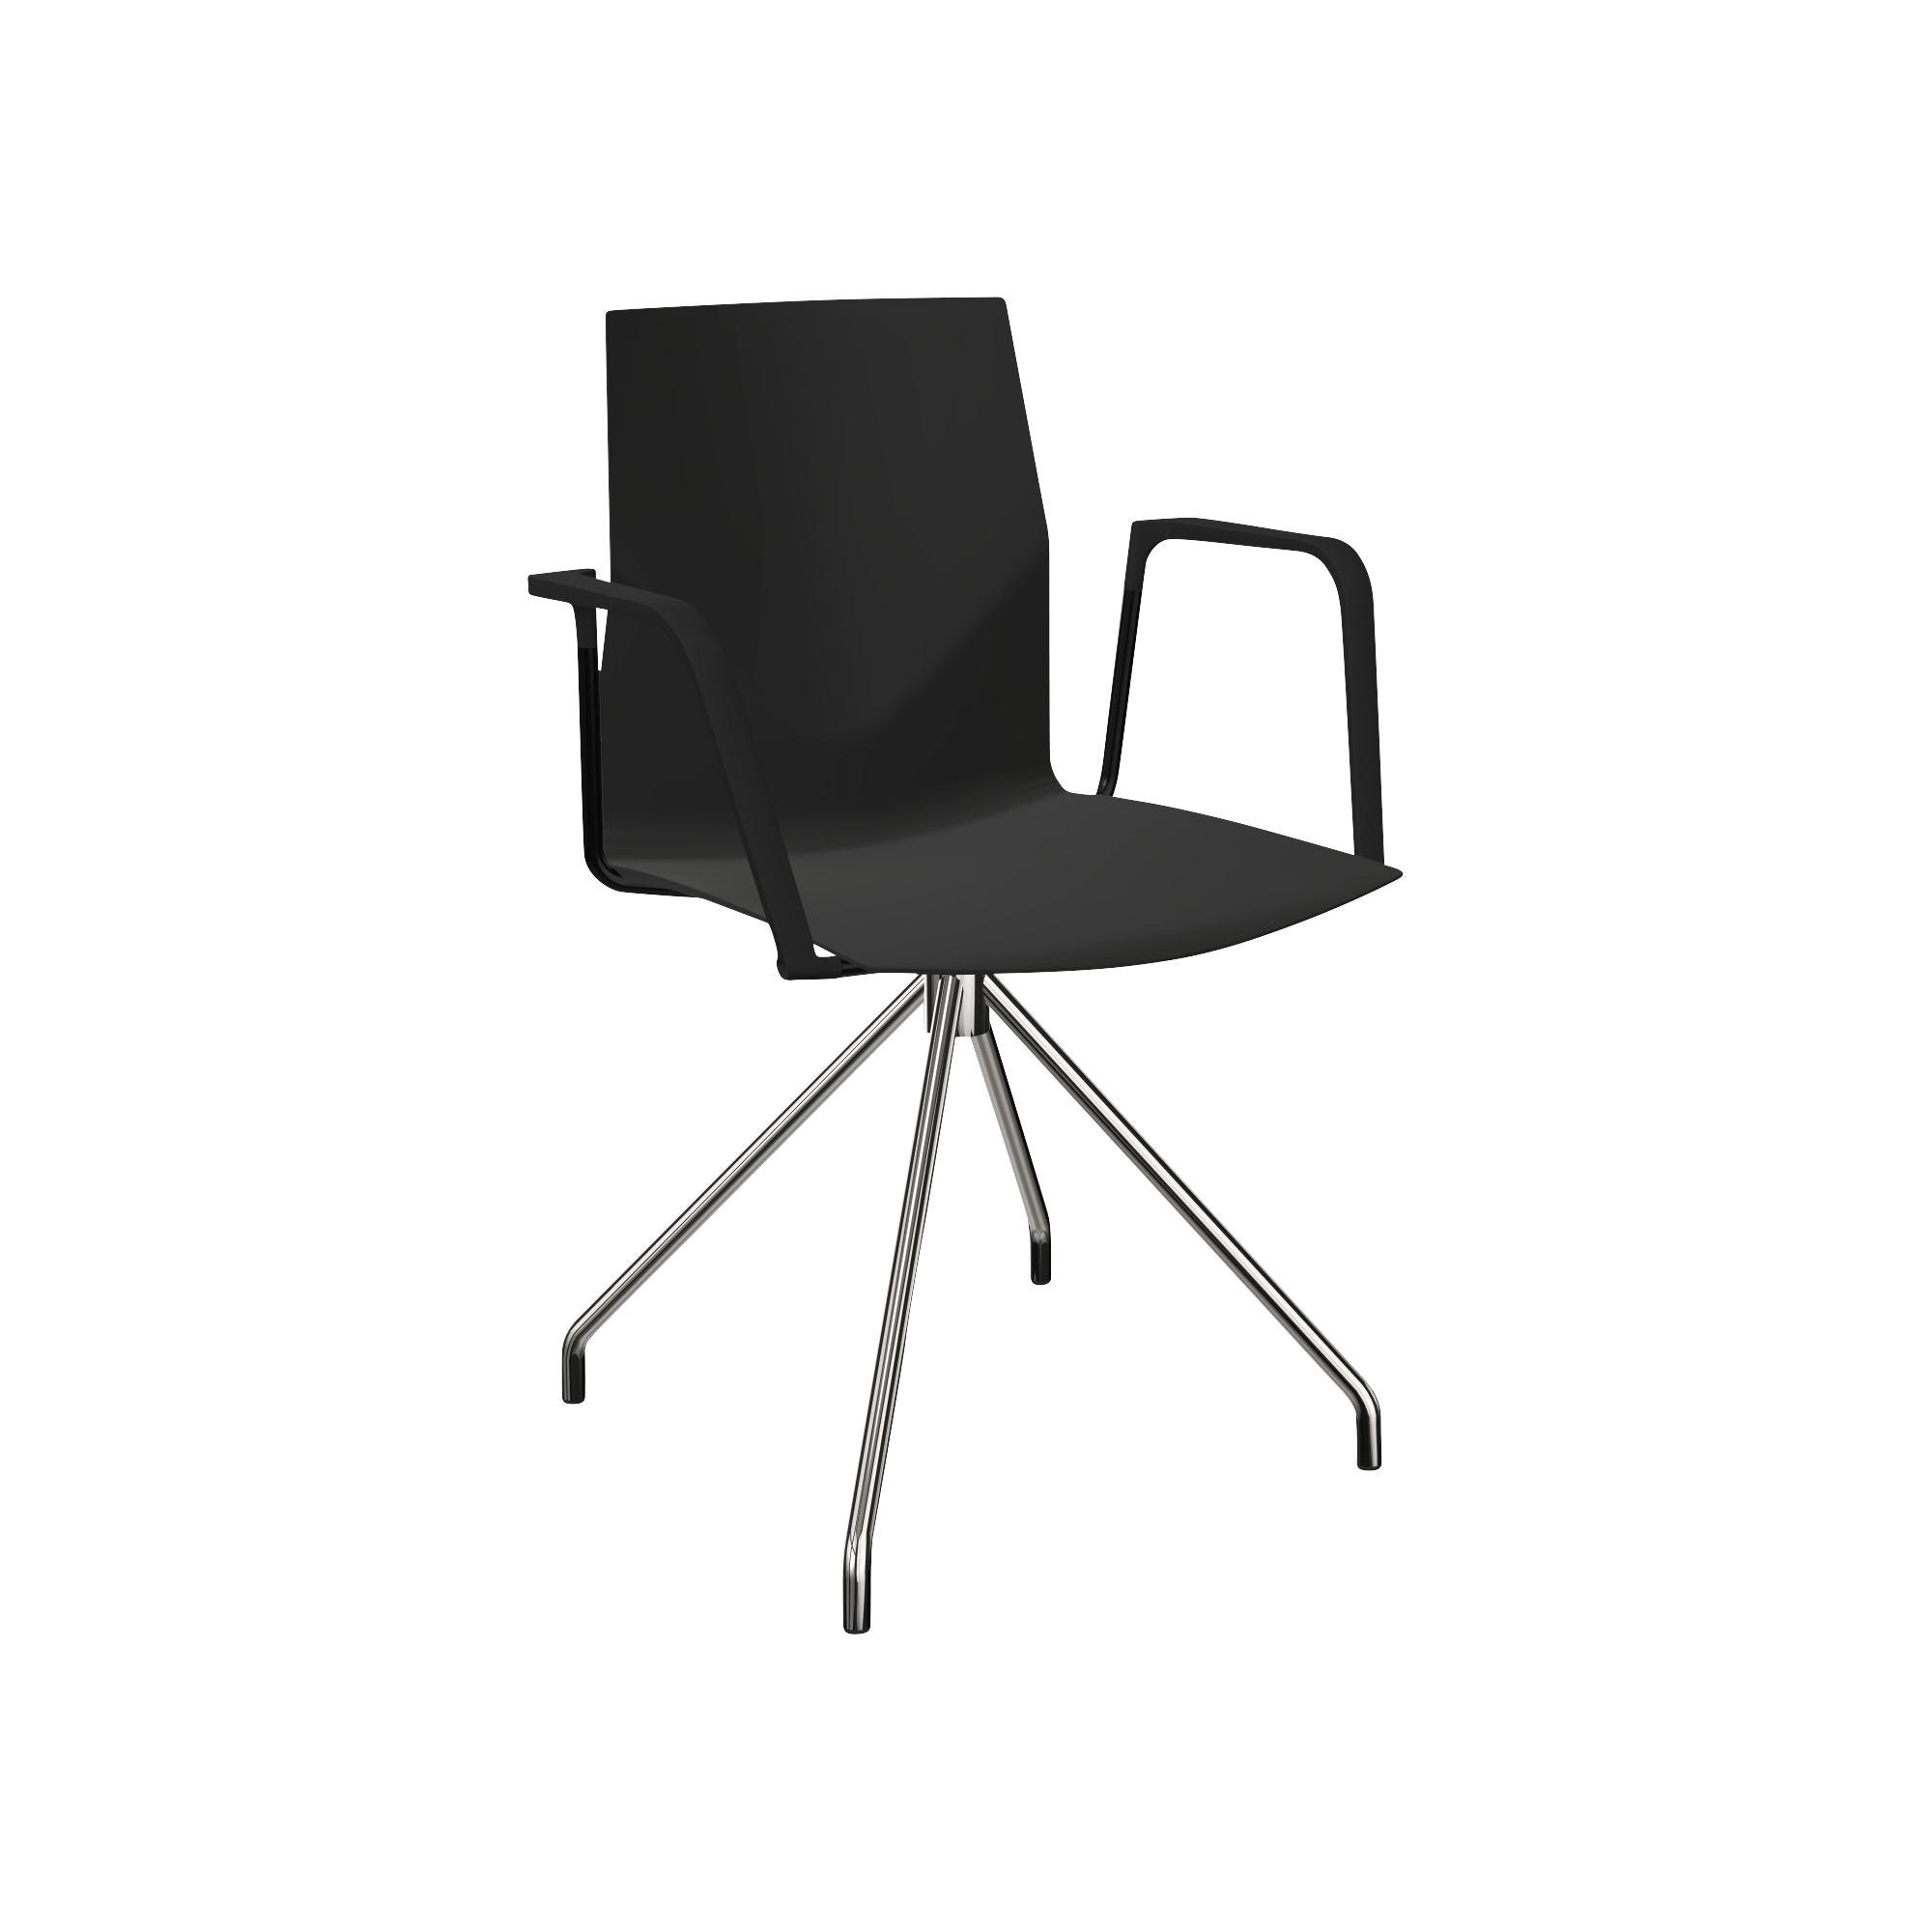 A black chair with metal legs.